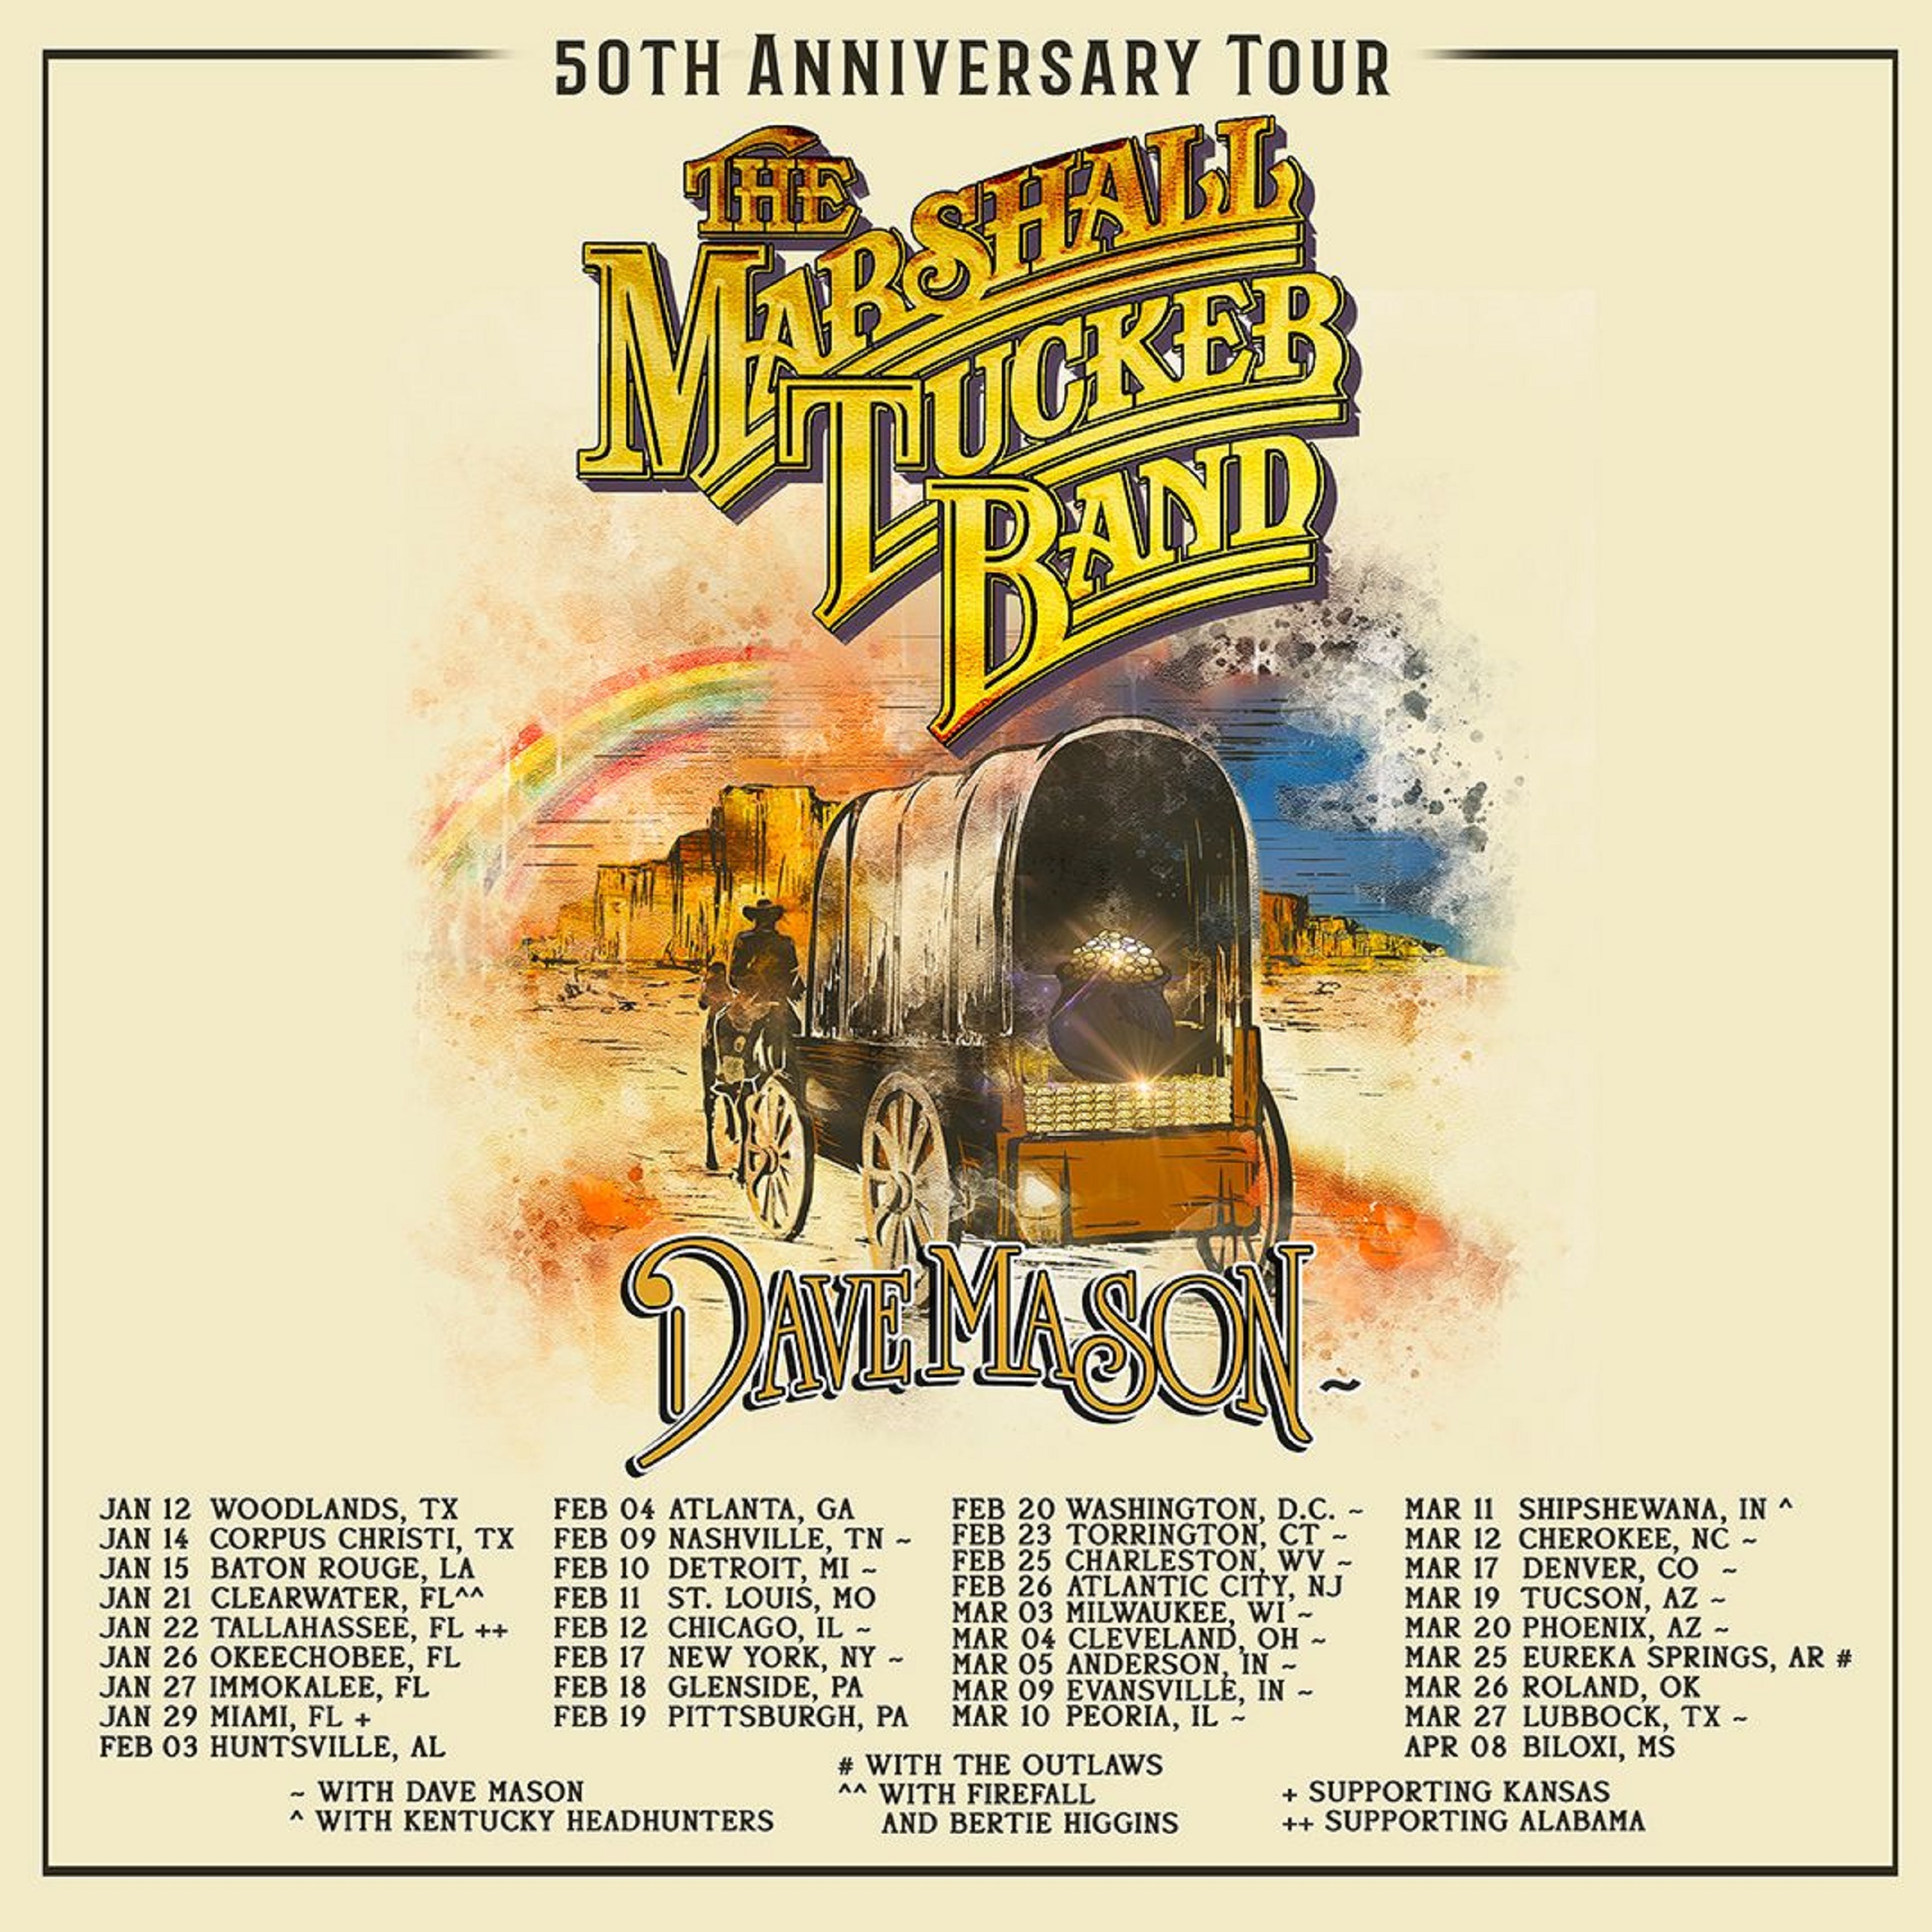 THE MARSHALL TUCKER BAND ANNOUNCES HISTORIC "50TH ANNIVERSARY TOUR